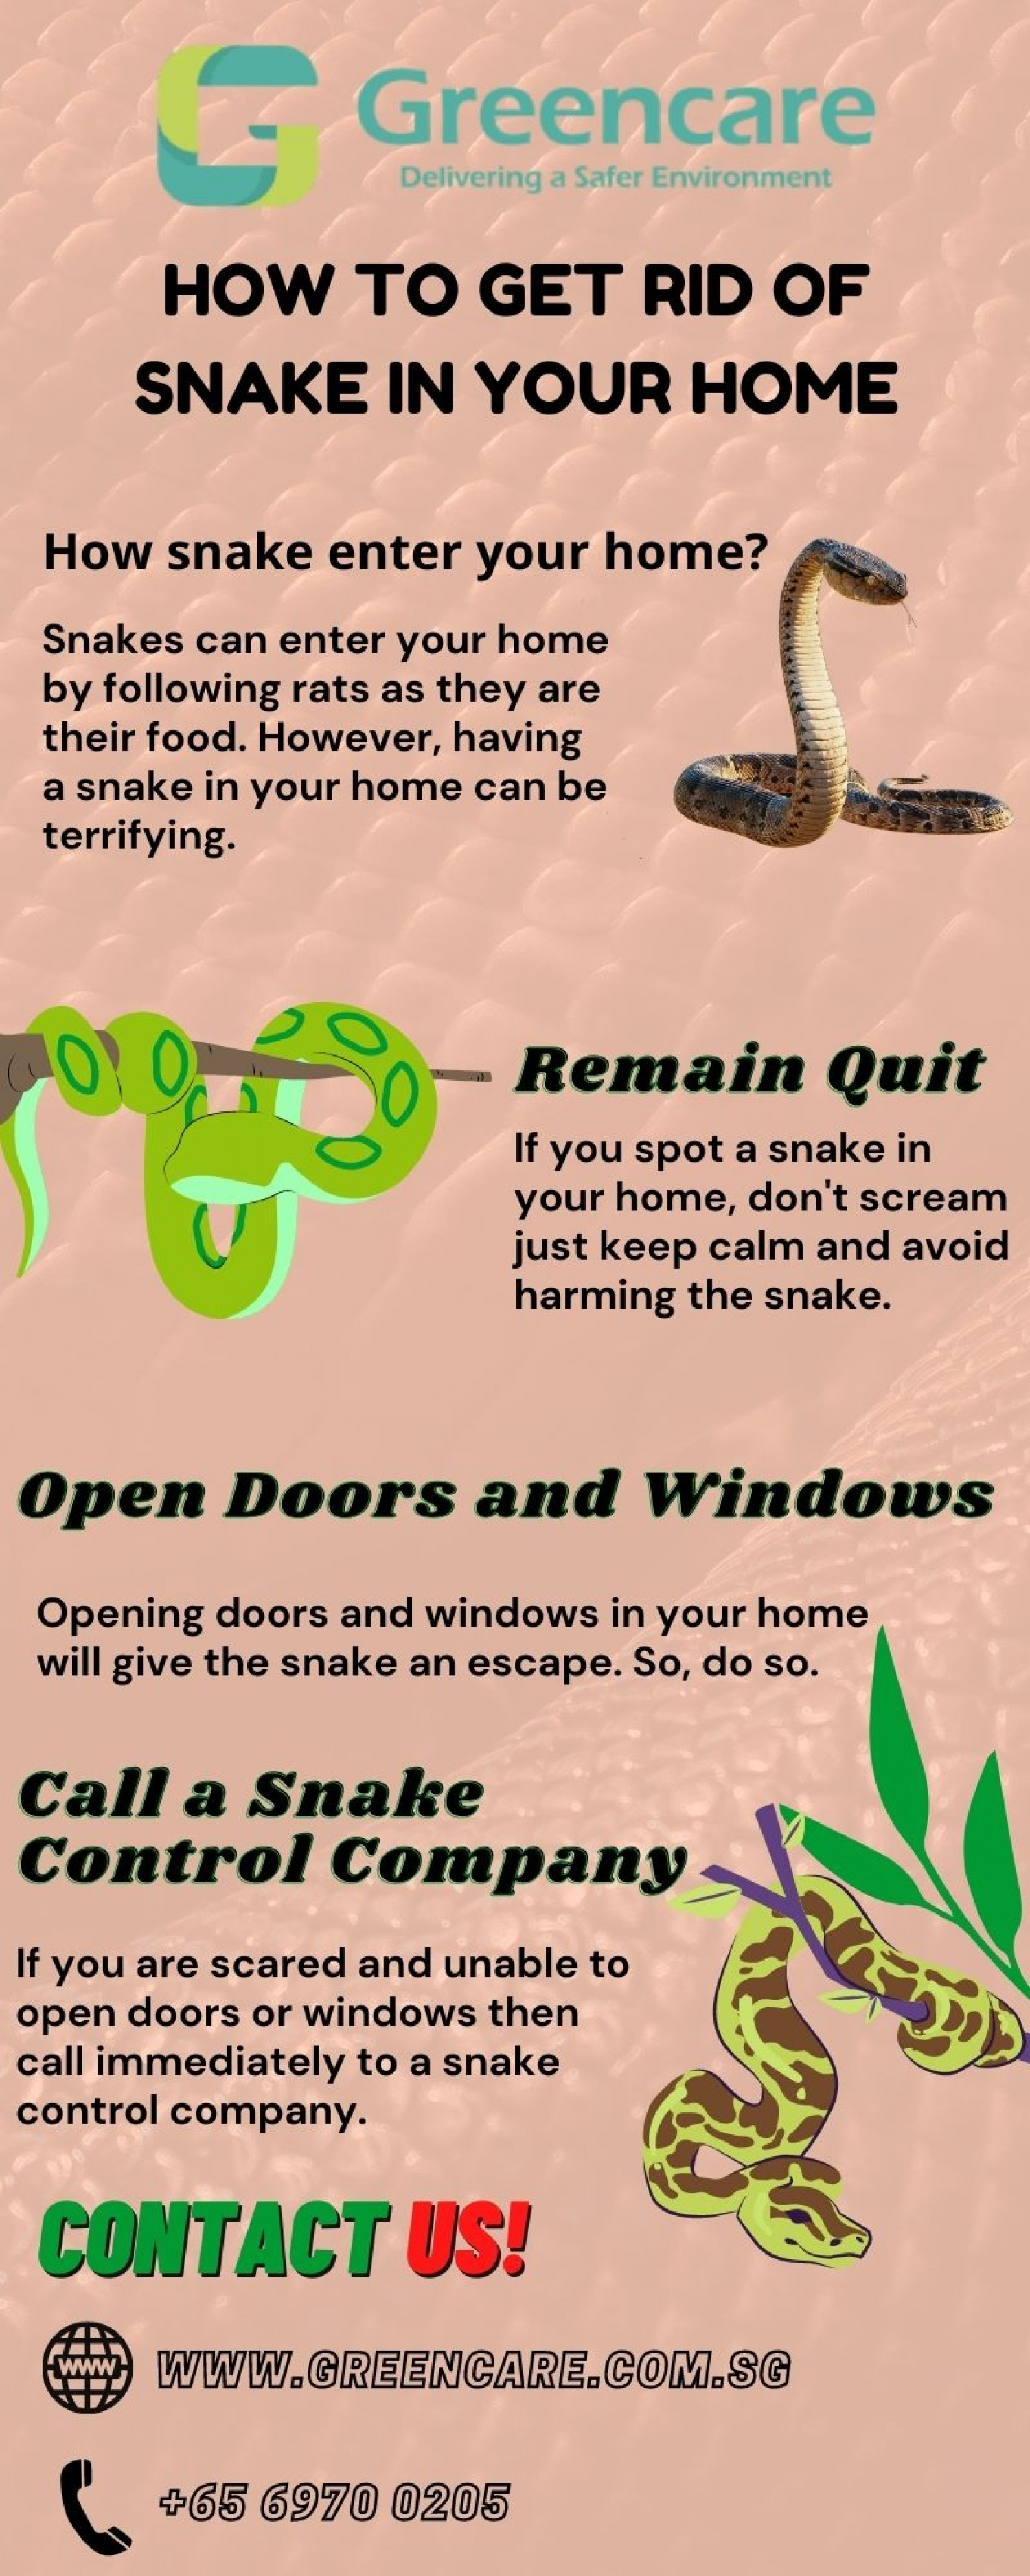 How to get rid of snake in your home Infographic